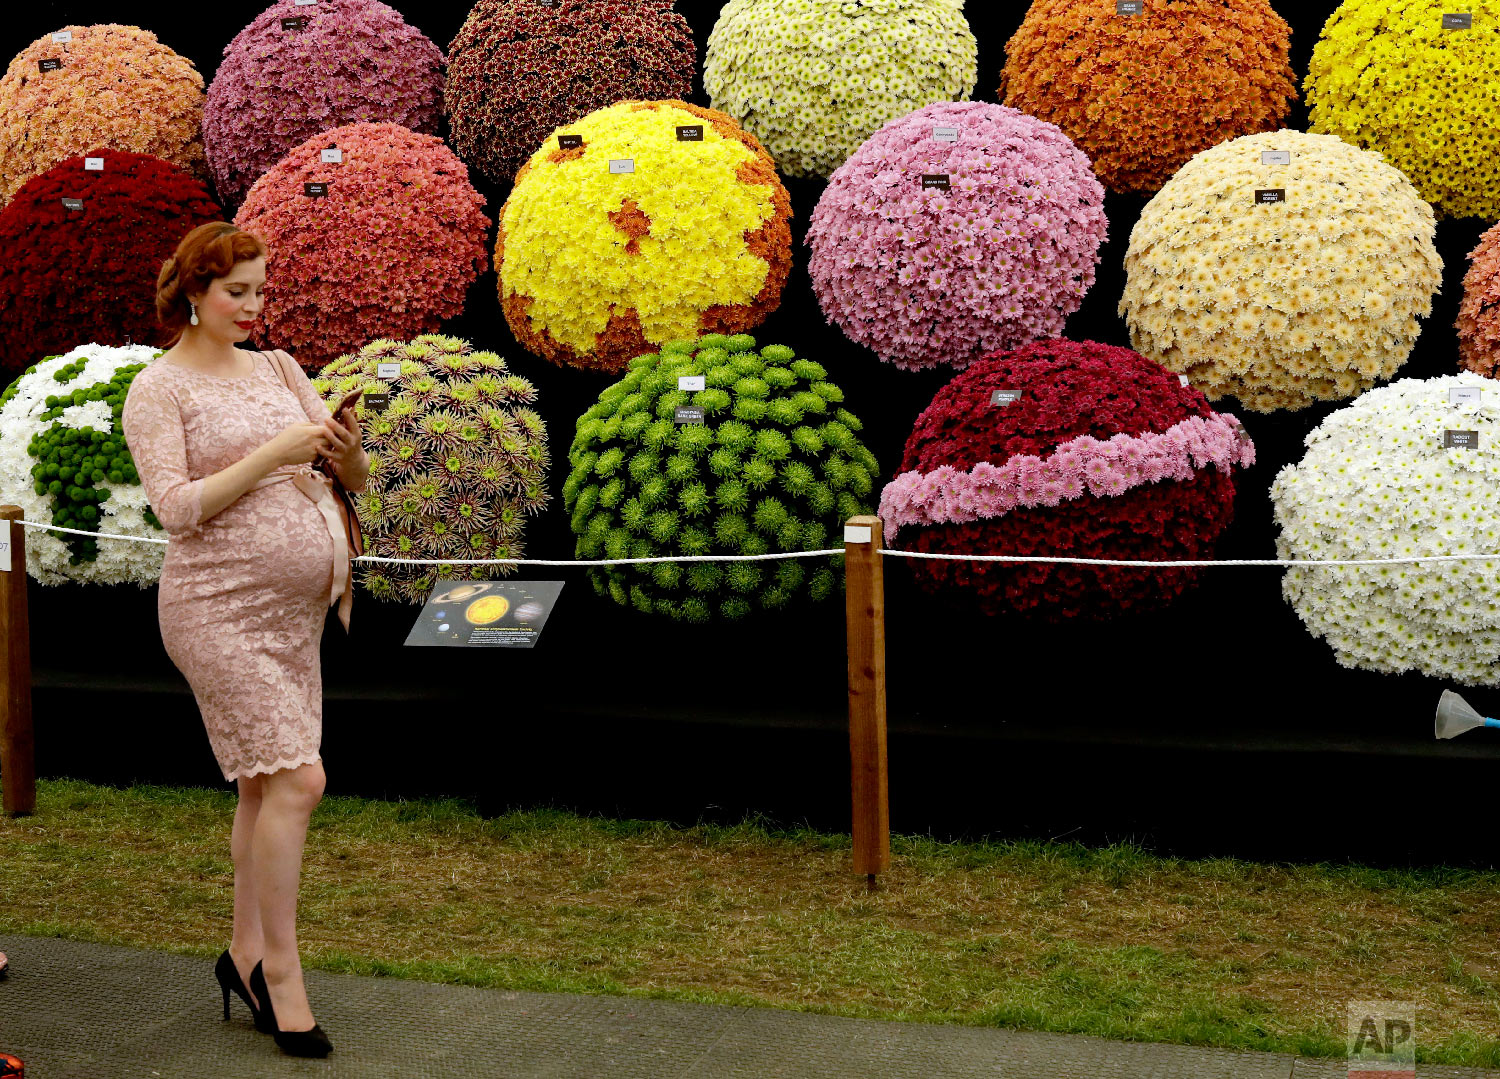  A visitor walks past the National Chrysanthemum Society display at the RHS (Royal Horticultural Society) Chelsea Flower Show in London on May 21, 2018.  (AP Photo/Matt Dunham) 